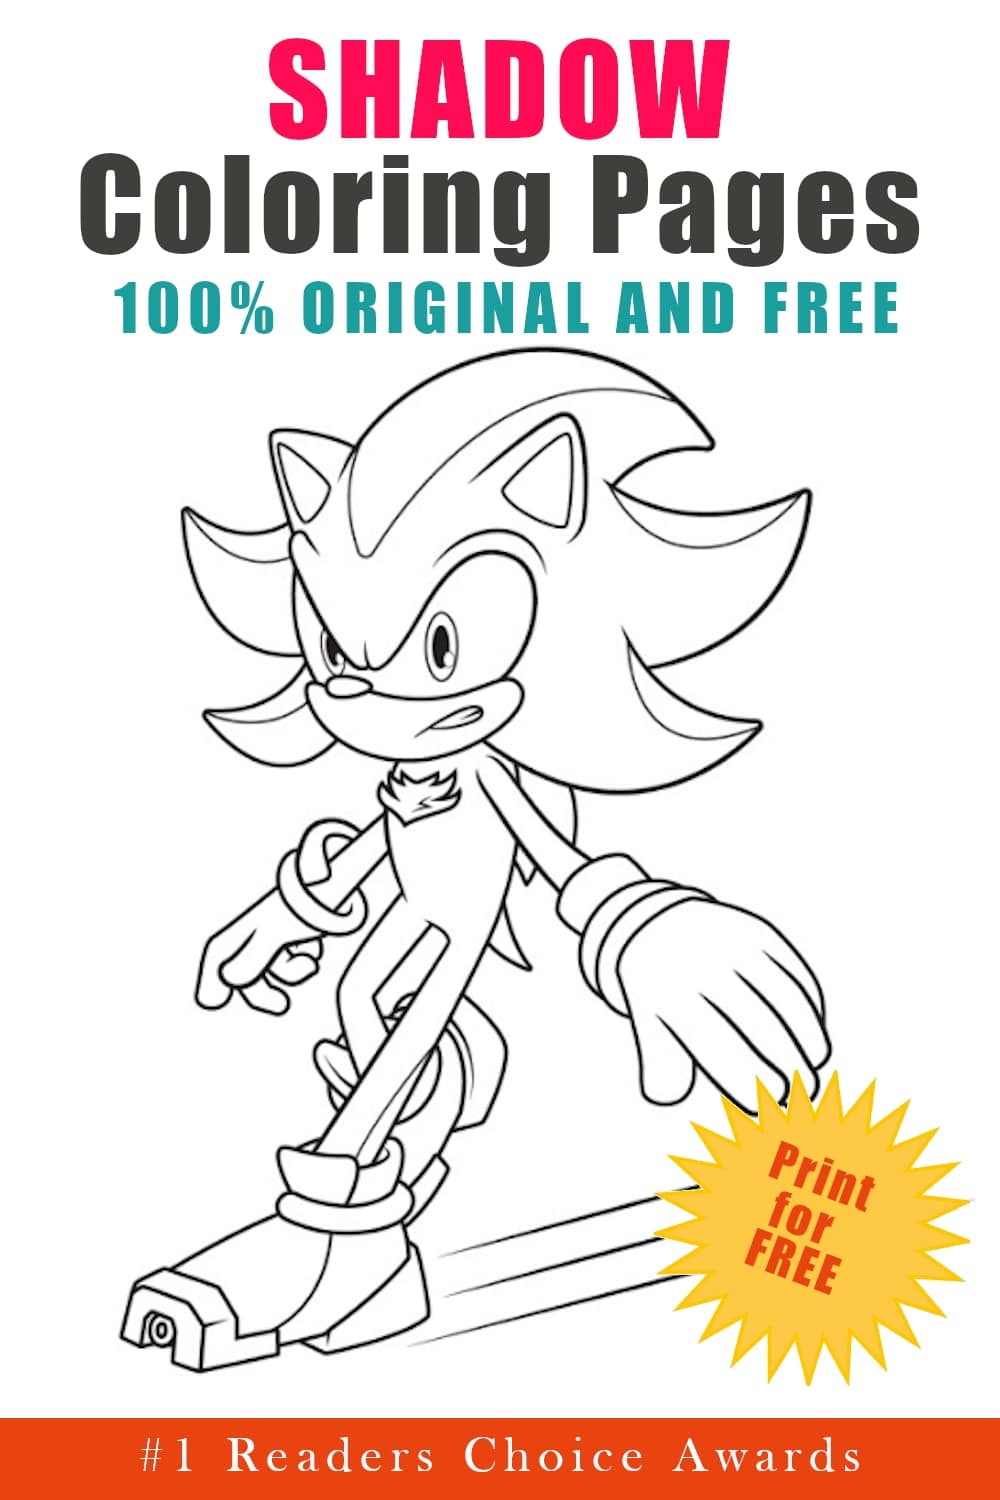 Original and Free Shadow the Hedgehog Coloring Pages